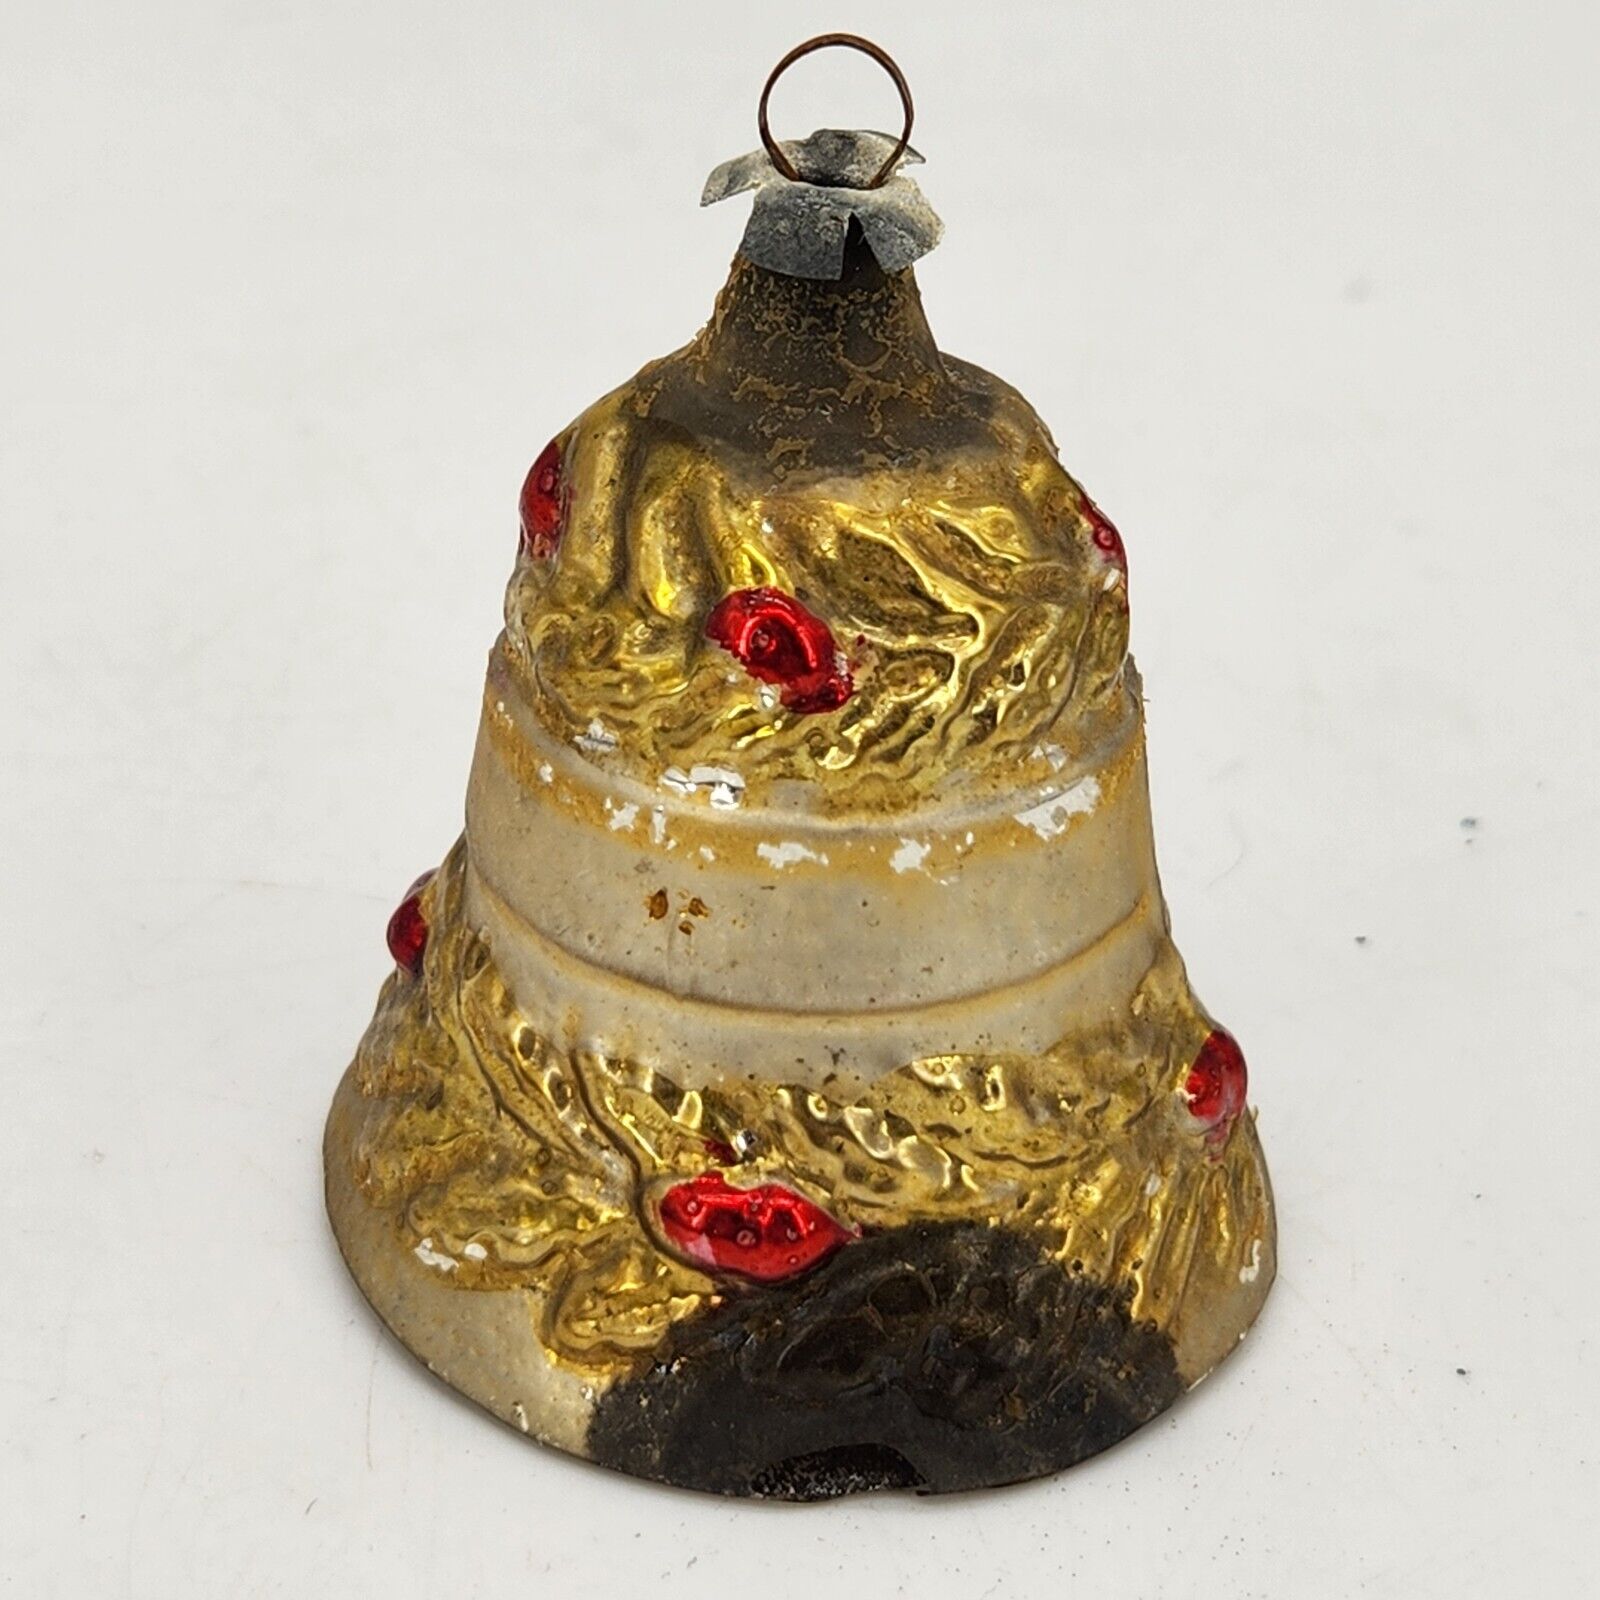 Antique Blown Glass Embossed Painted Gold Bell German Christmas Tree Ornament